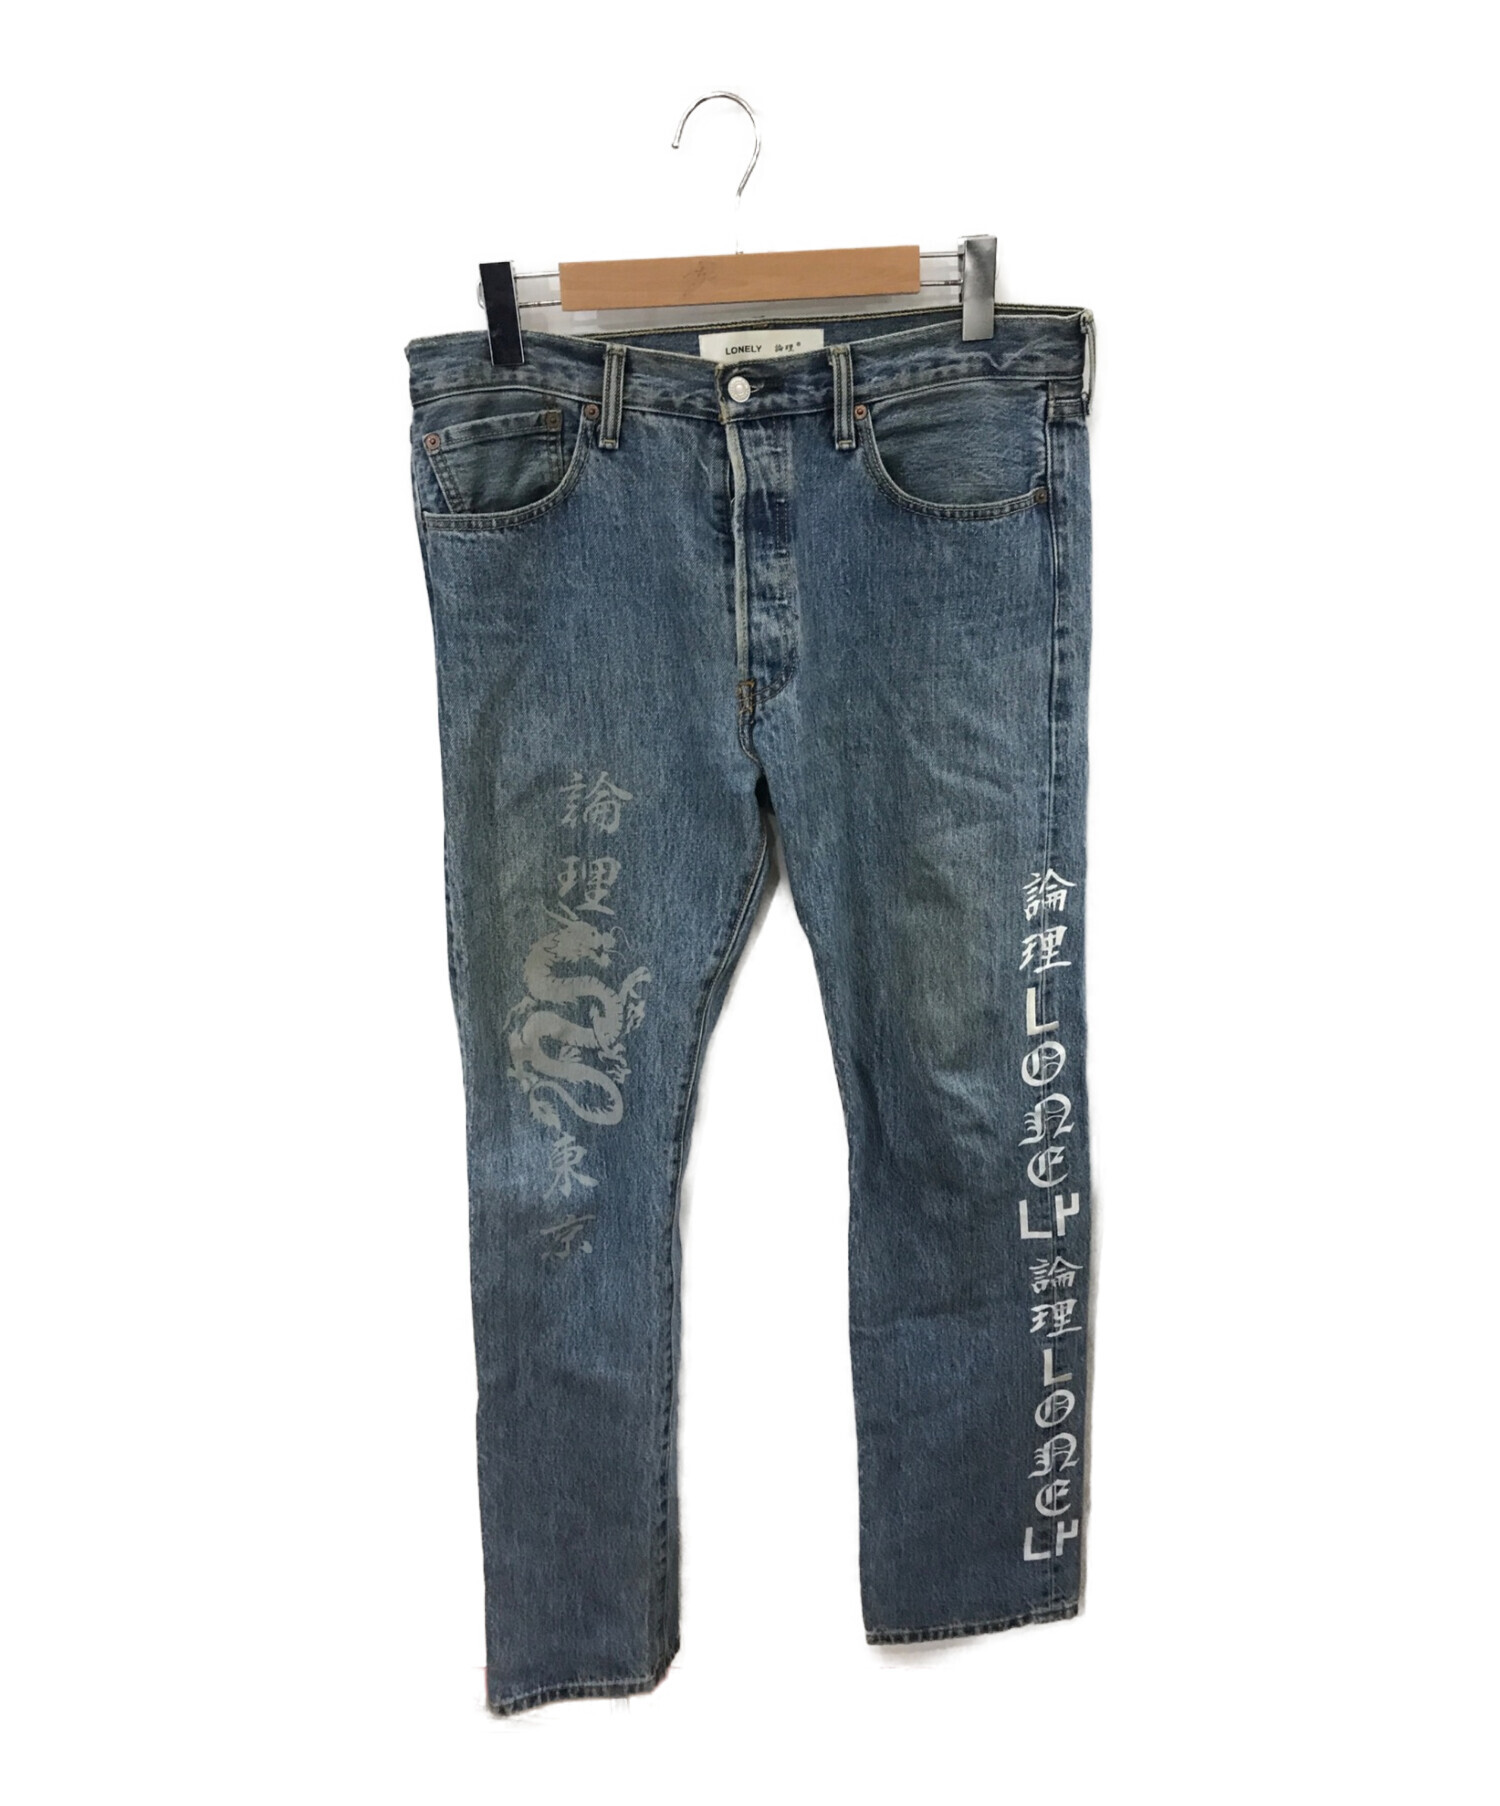 【LONELY/論理×LEVI’S】501xx reflective jeans